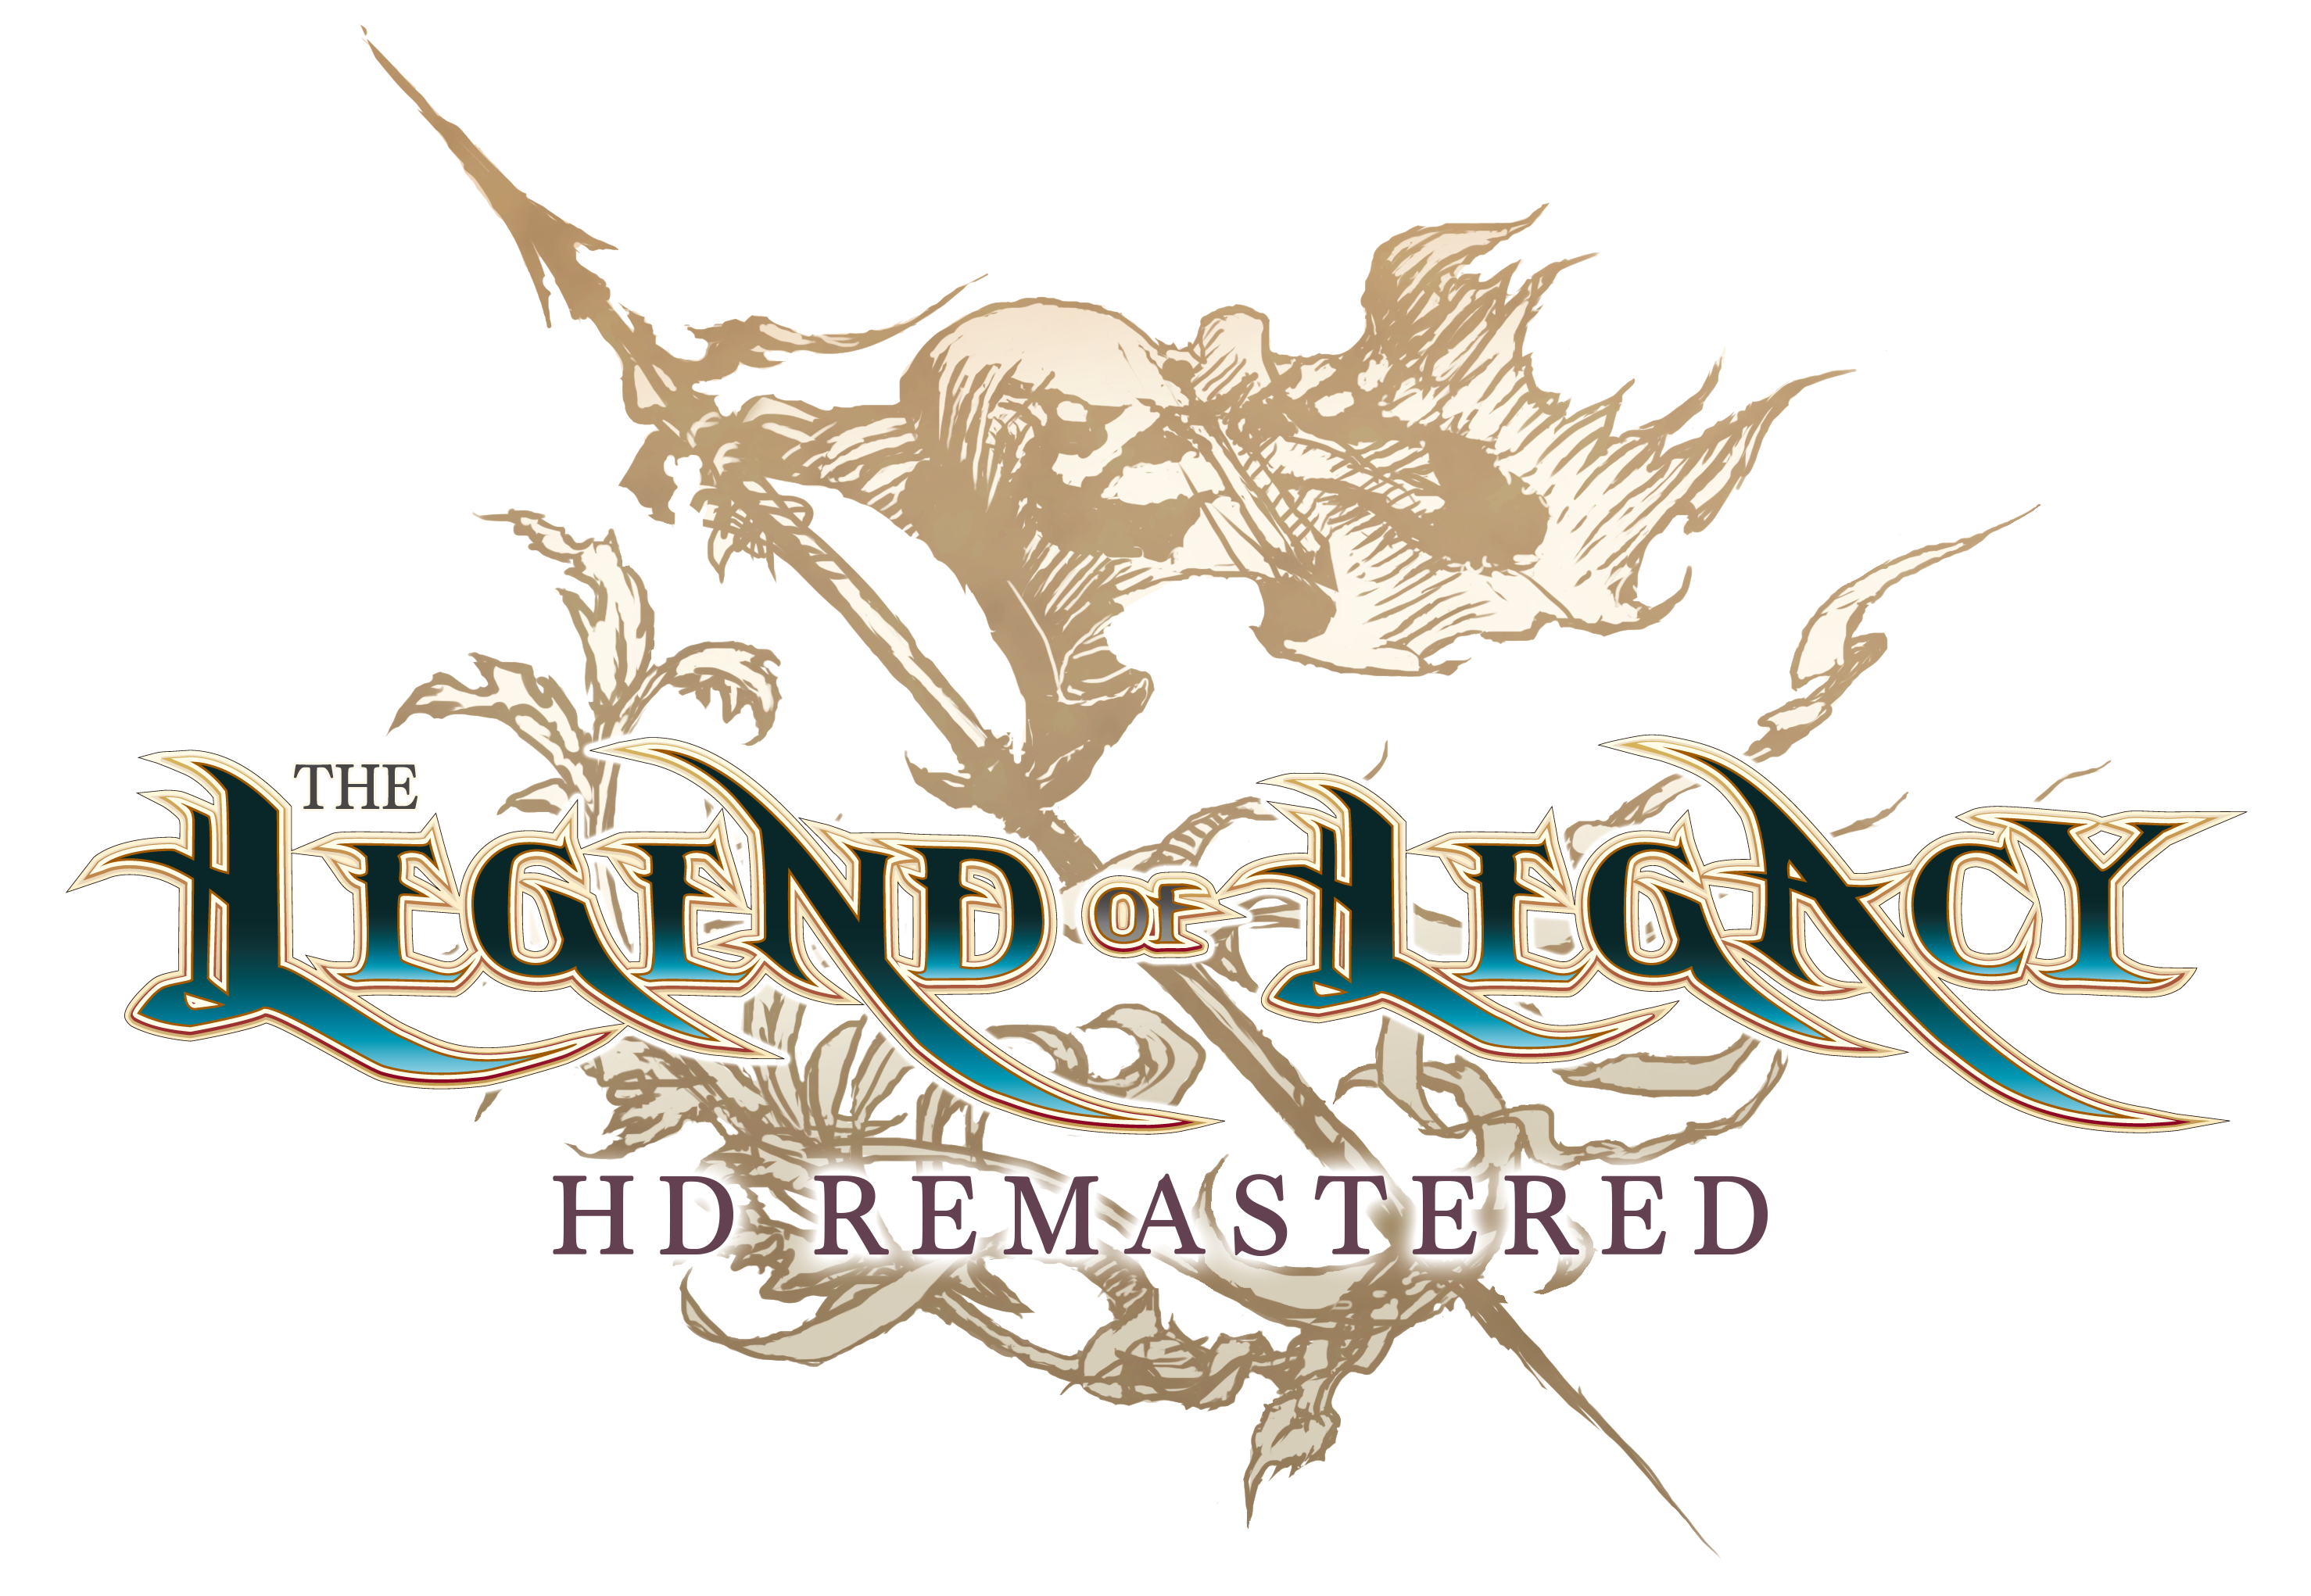 The Legend of Legacy HD Remastered Available Now!